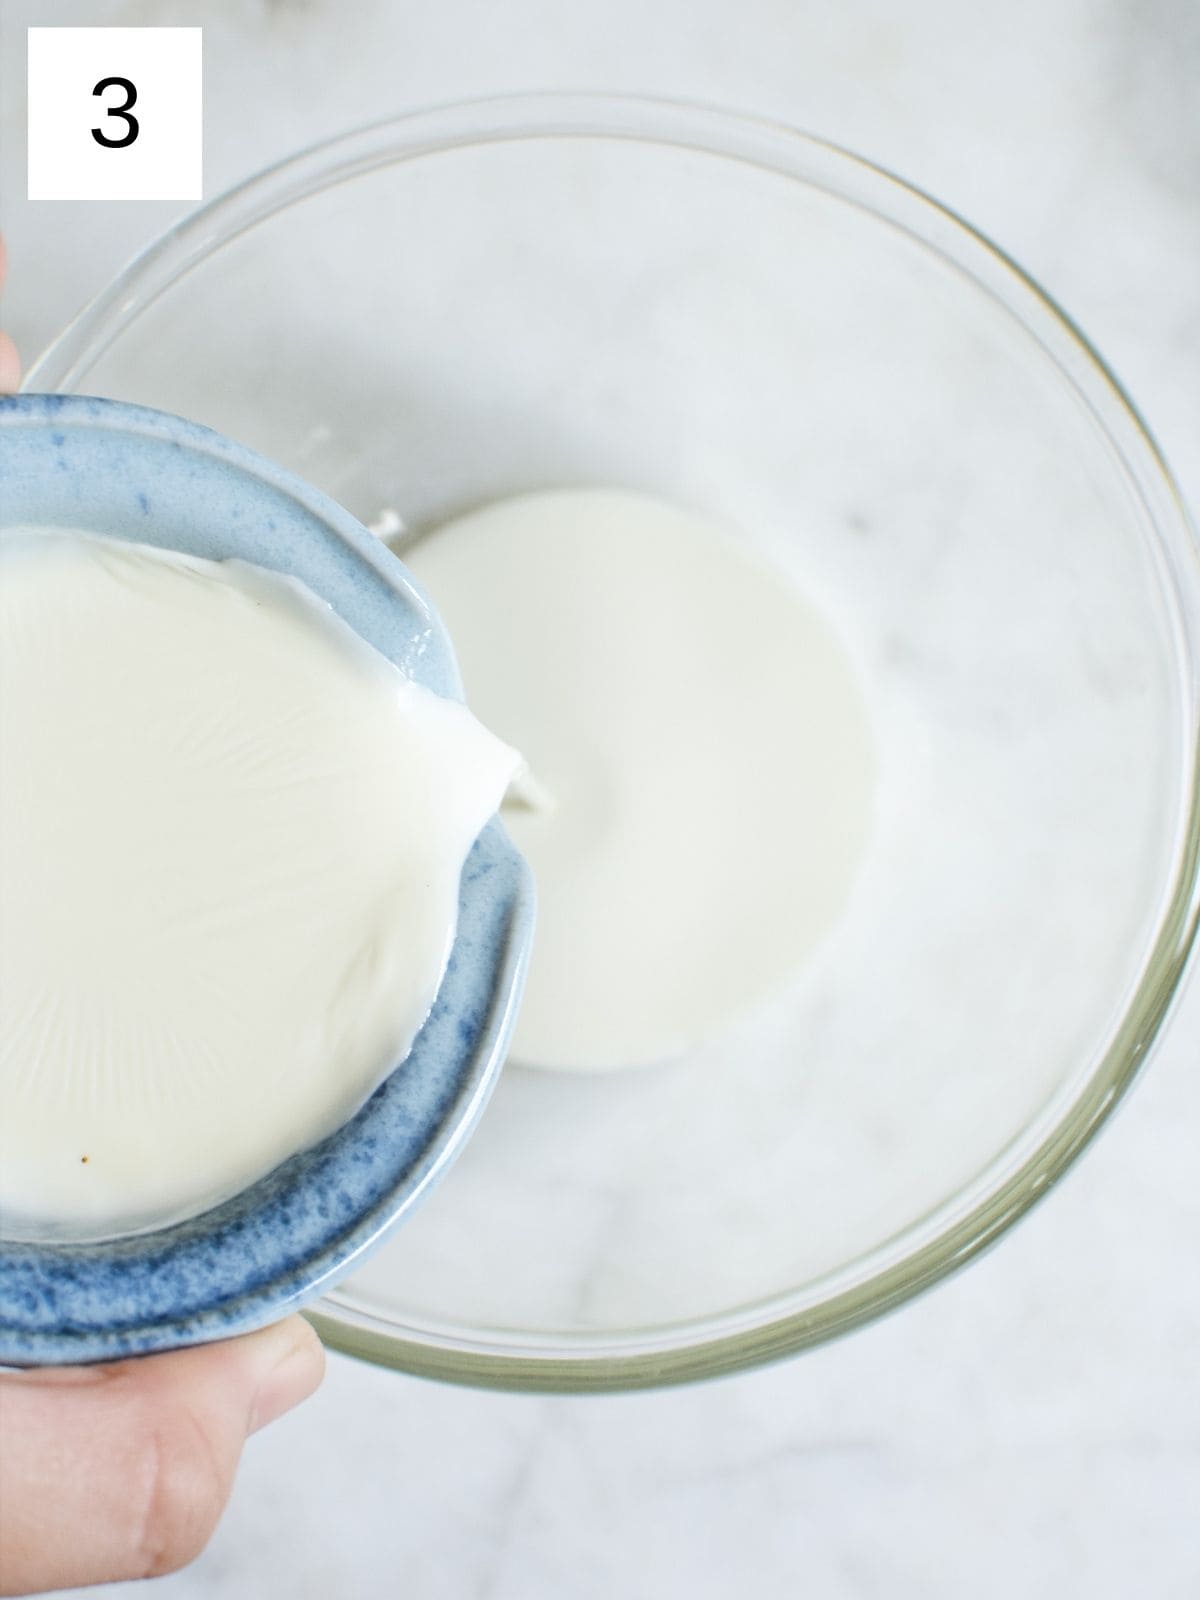 milk being poured into a mixing bowl.